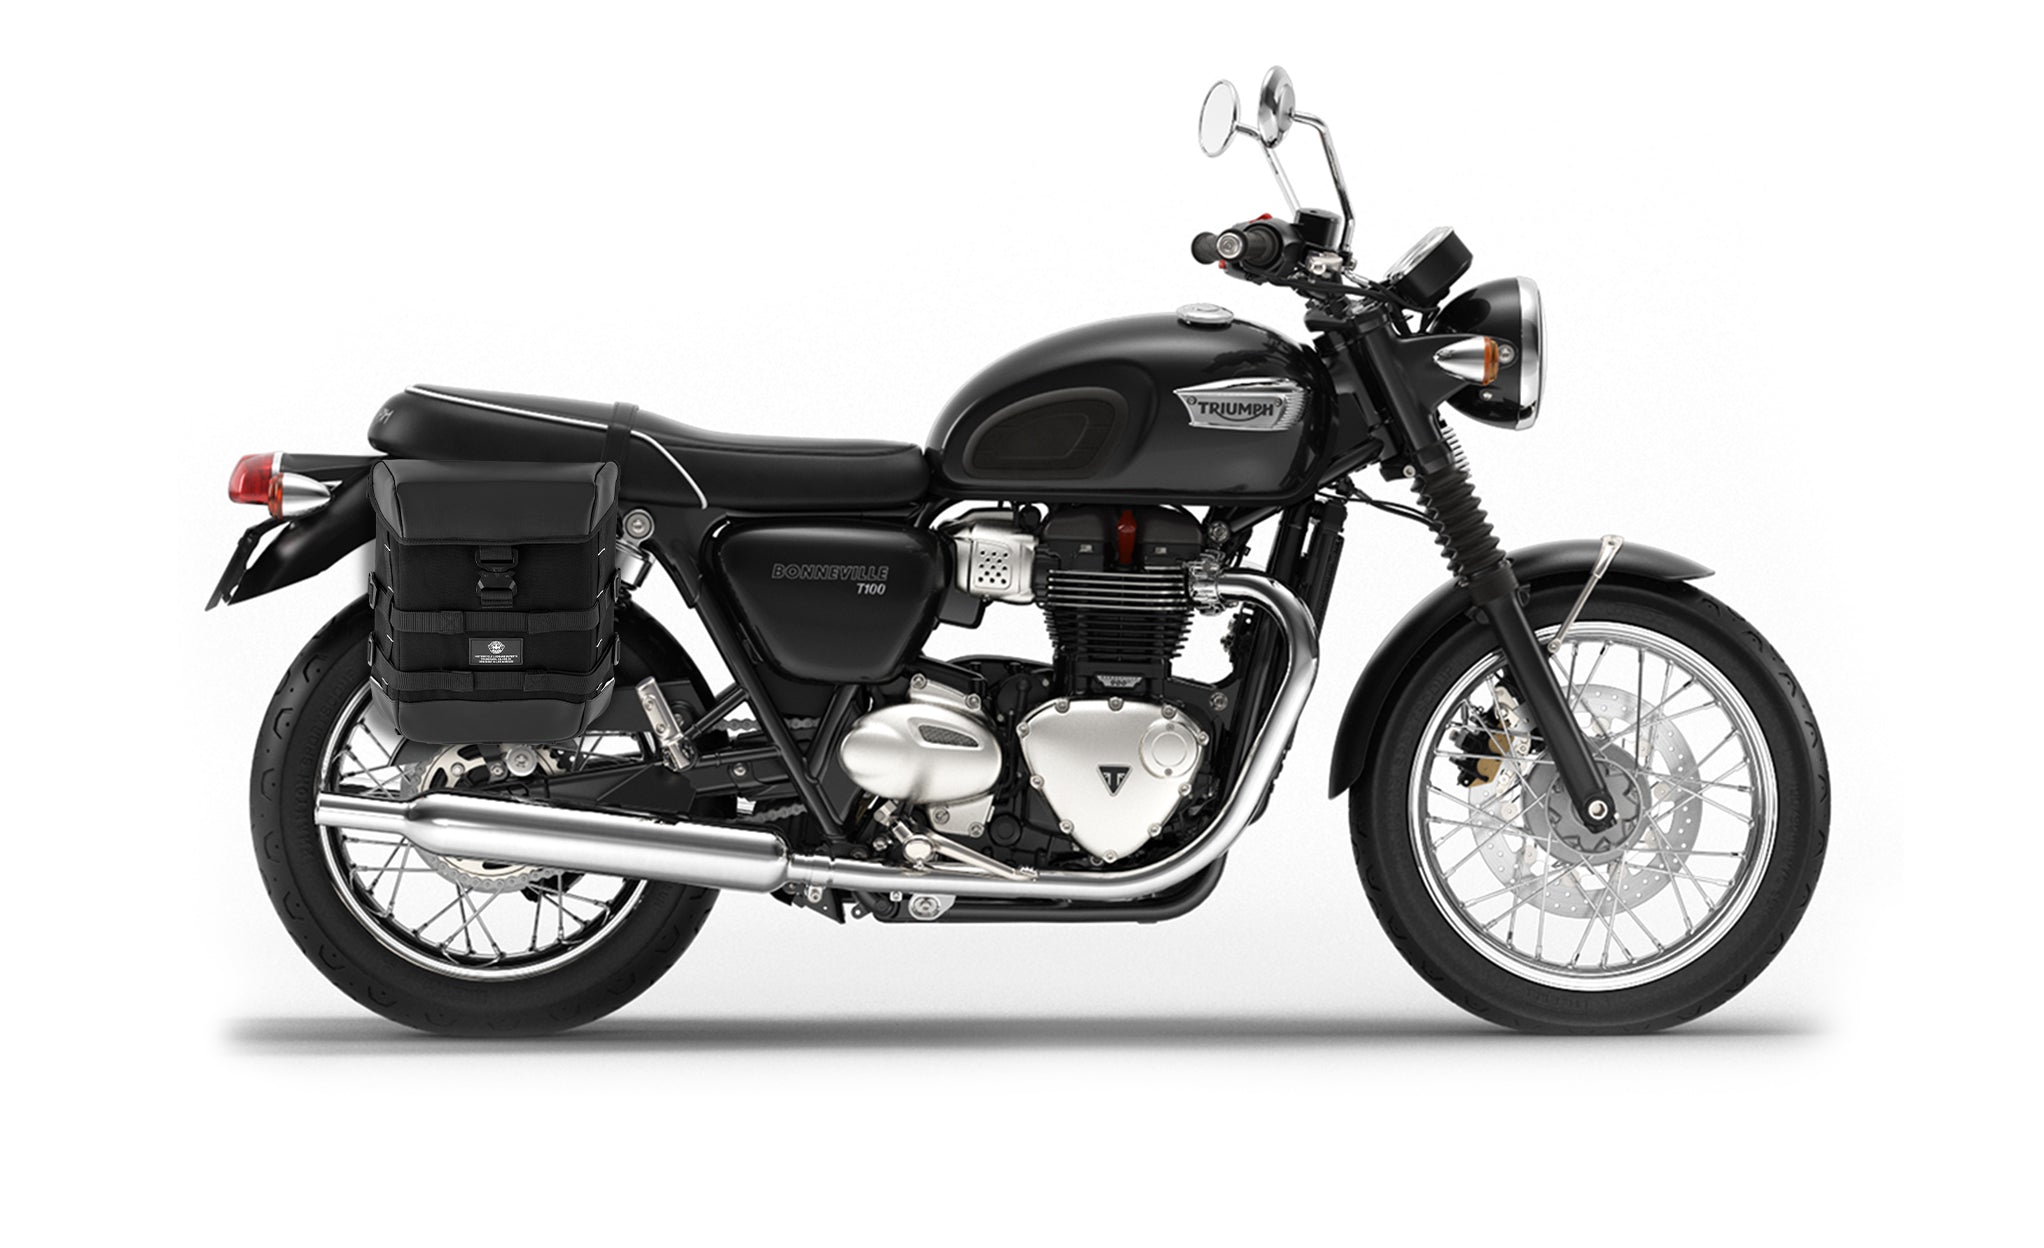 Viking Incognito Detachable Small Triumph Bonneville T100 Solo Motorcycle Saddlebag Right Only on Bike Photo @expand